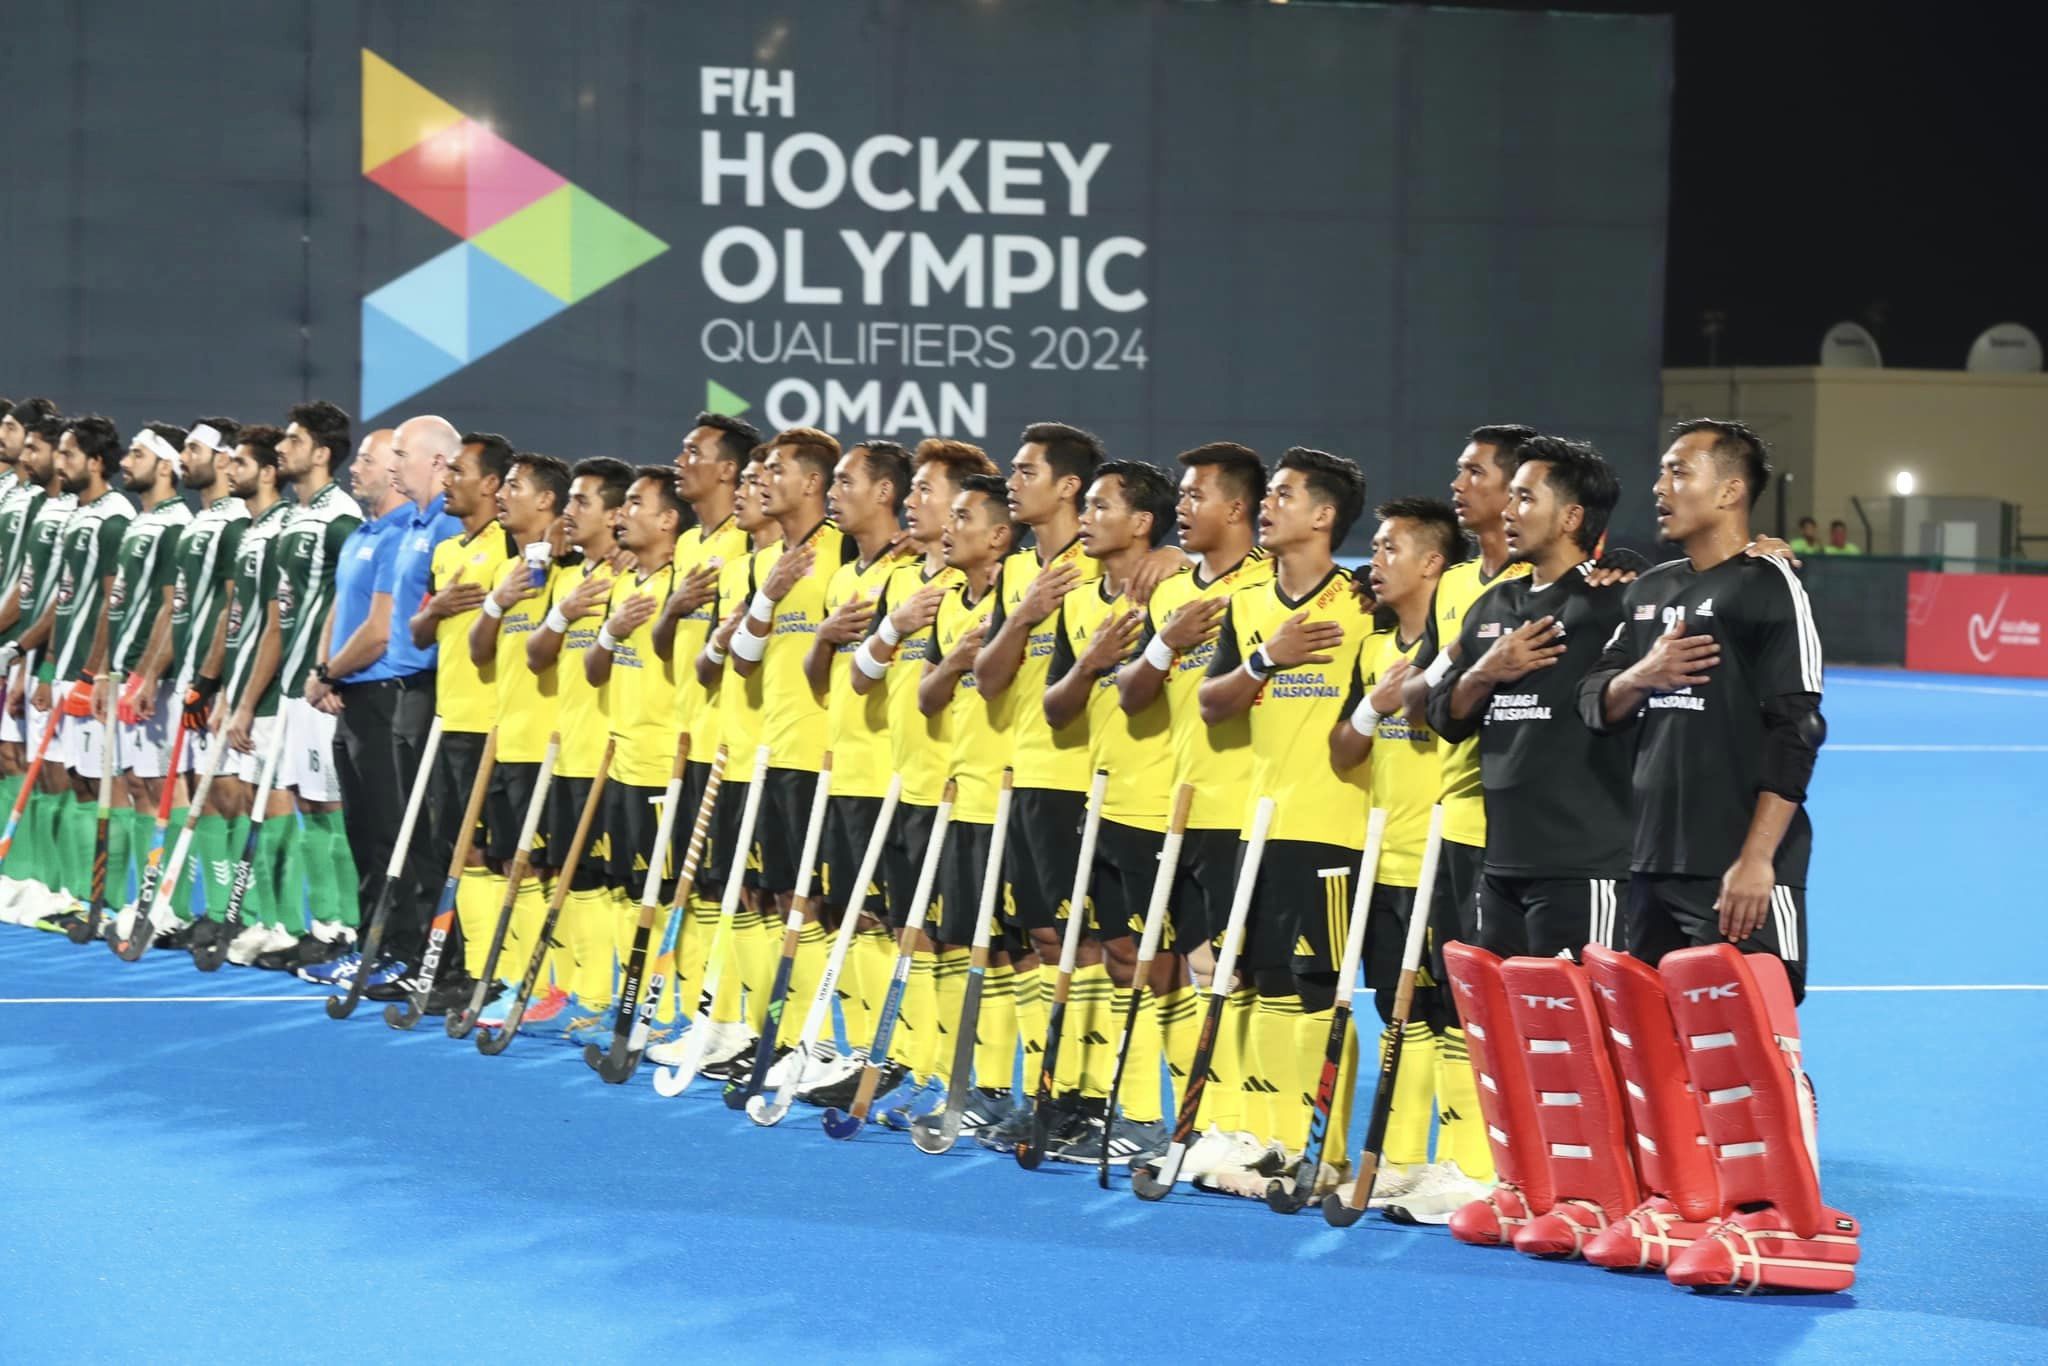 Malaysian hockey due for spring cleaning after Olympic qualifiers debacle – T. Vignesh